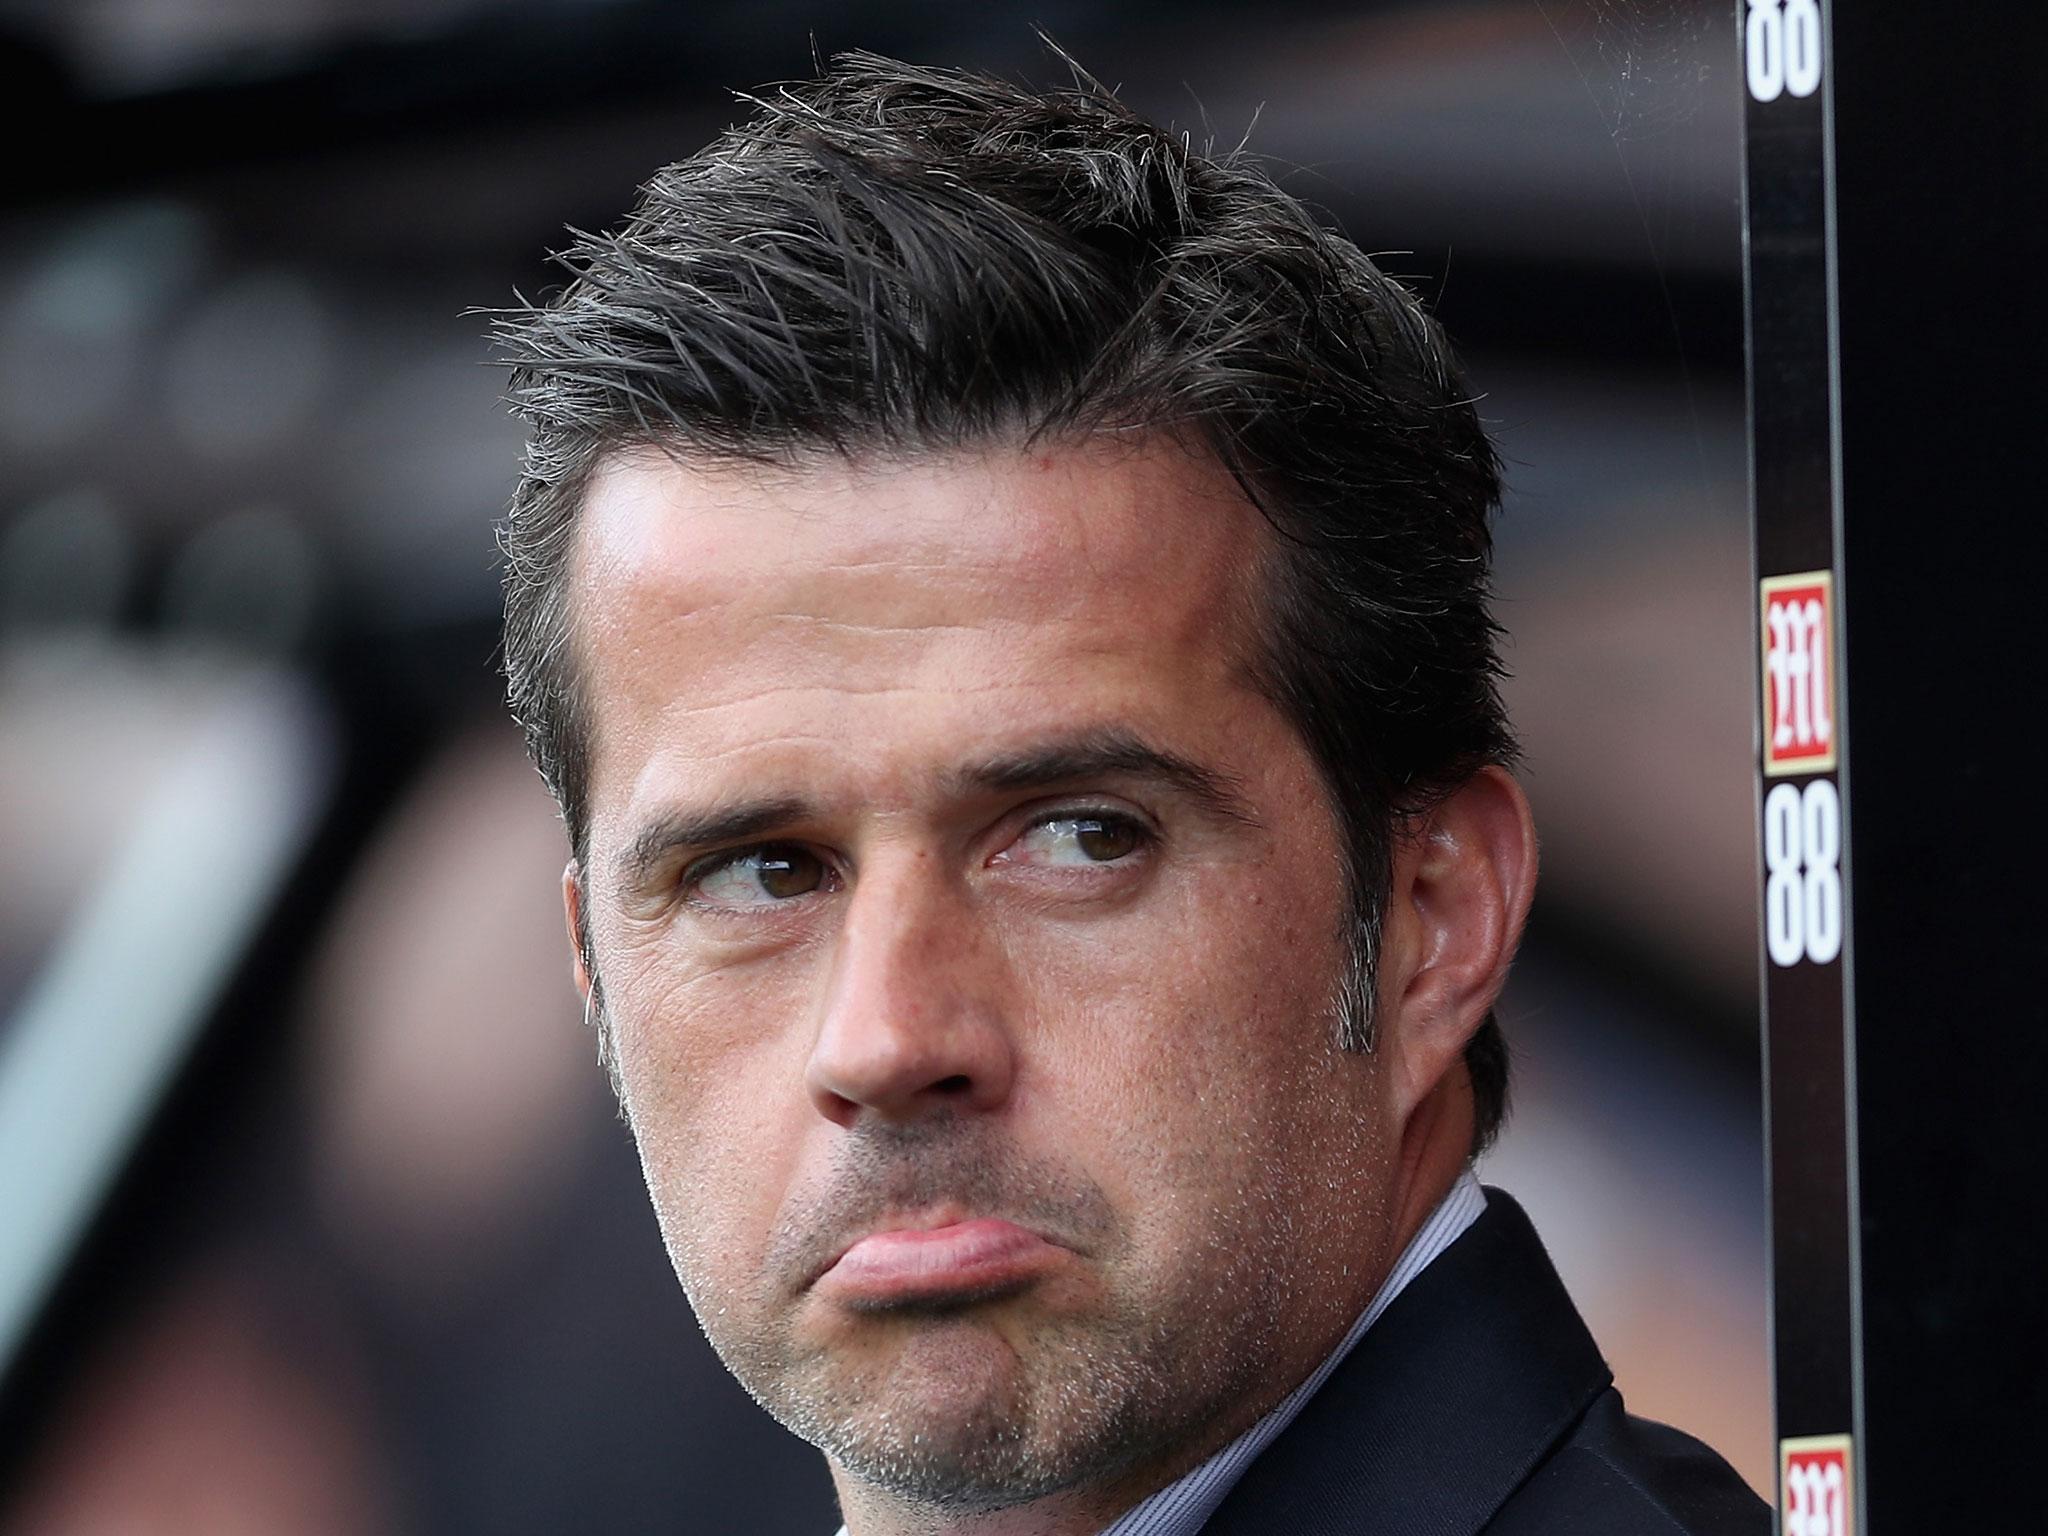 Marco Silva was very disappointed with Watford's performance on Tuesday evening